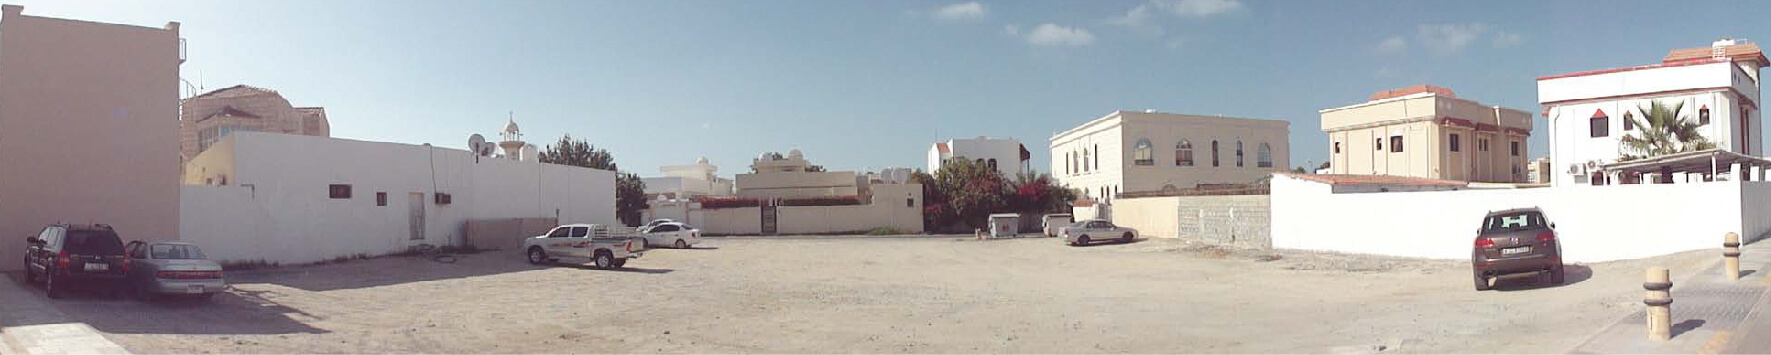 Panoramic photograph of the site showing the surrounding neighbourhood